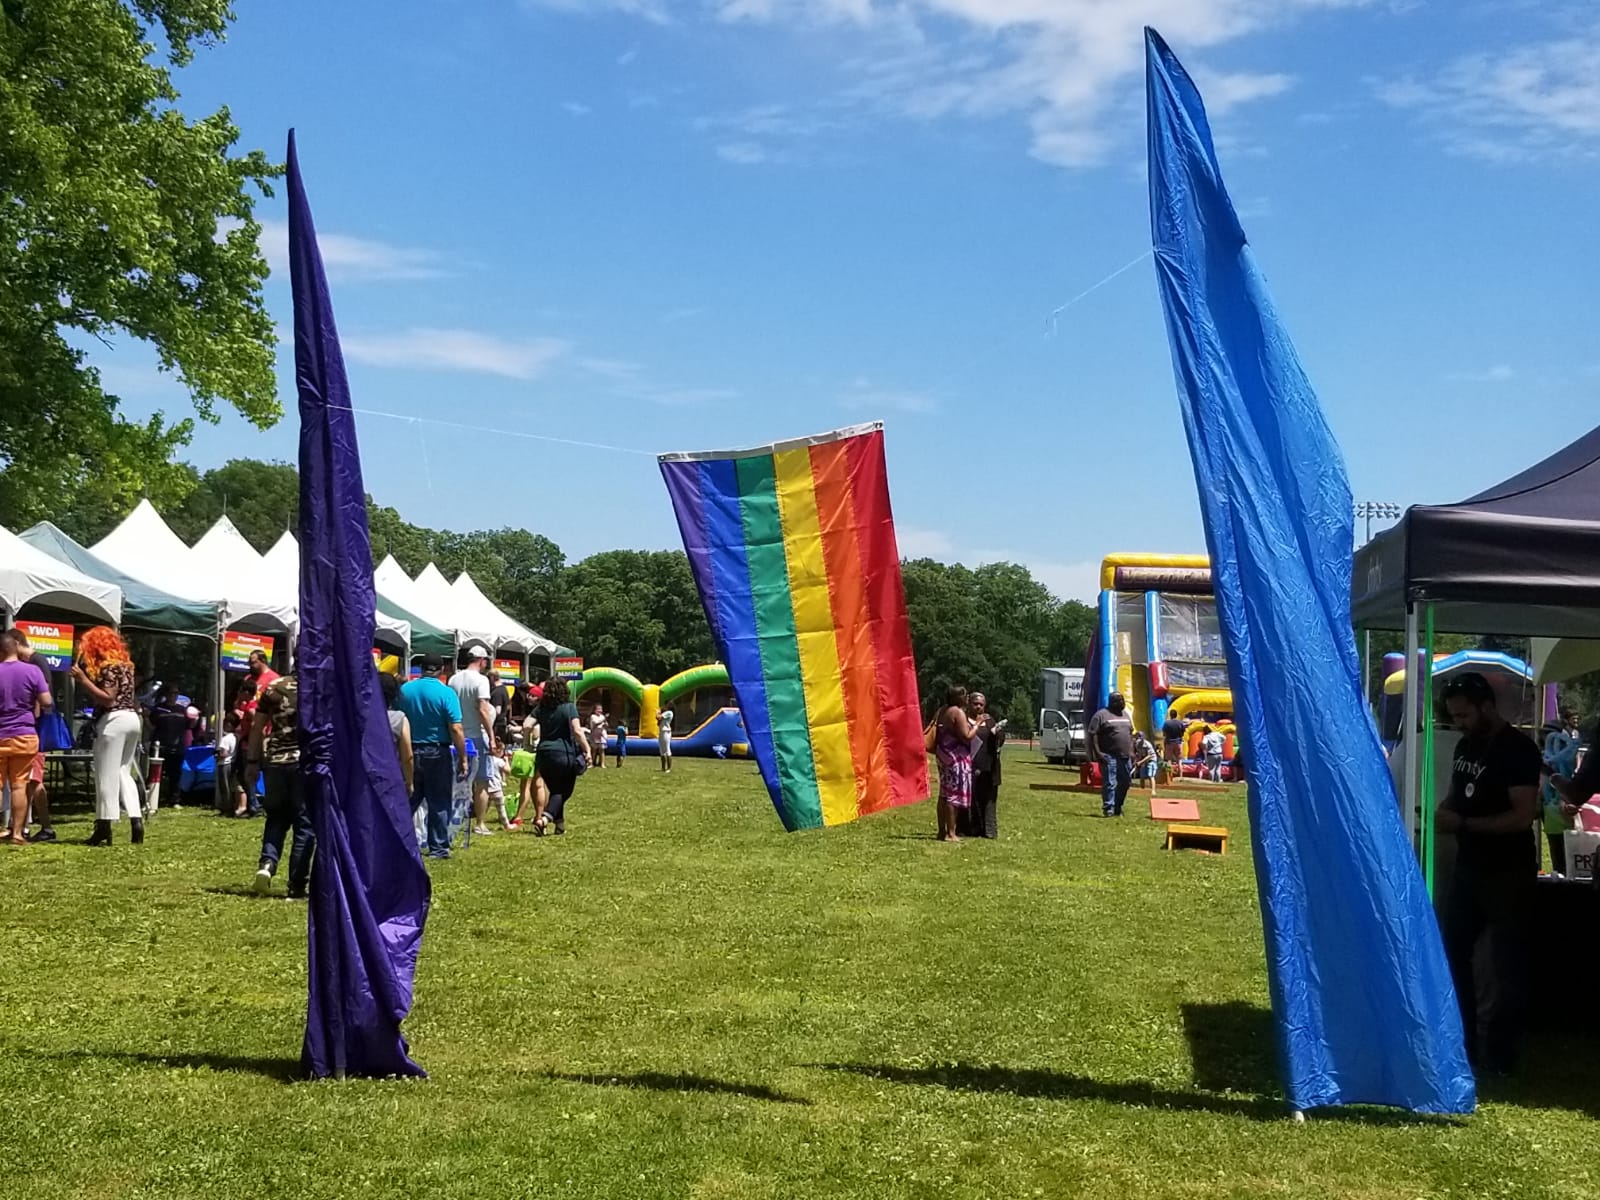 UC PRIDE In The Park County of Union